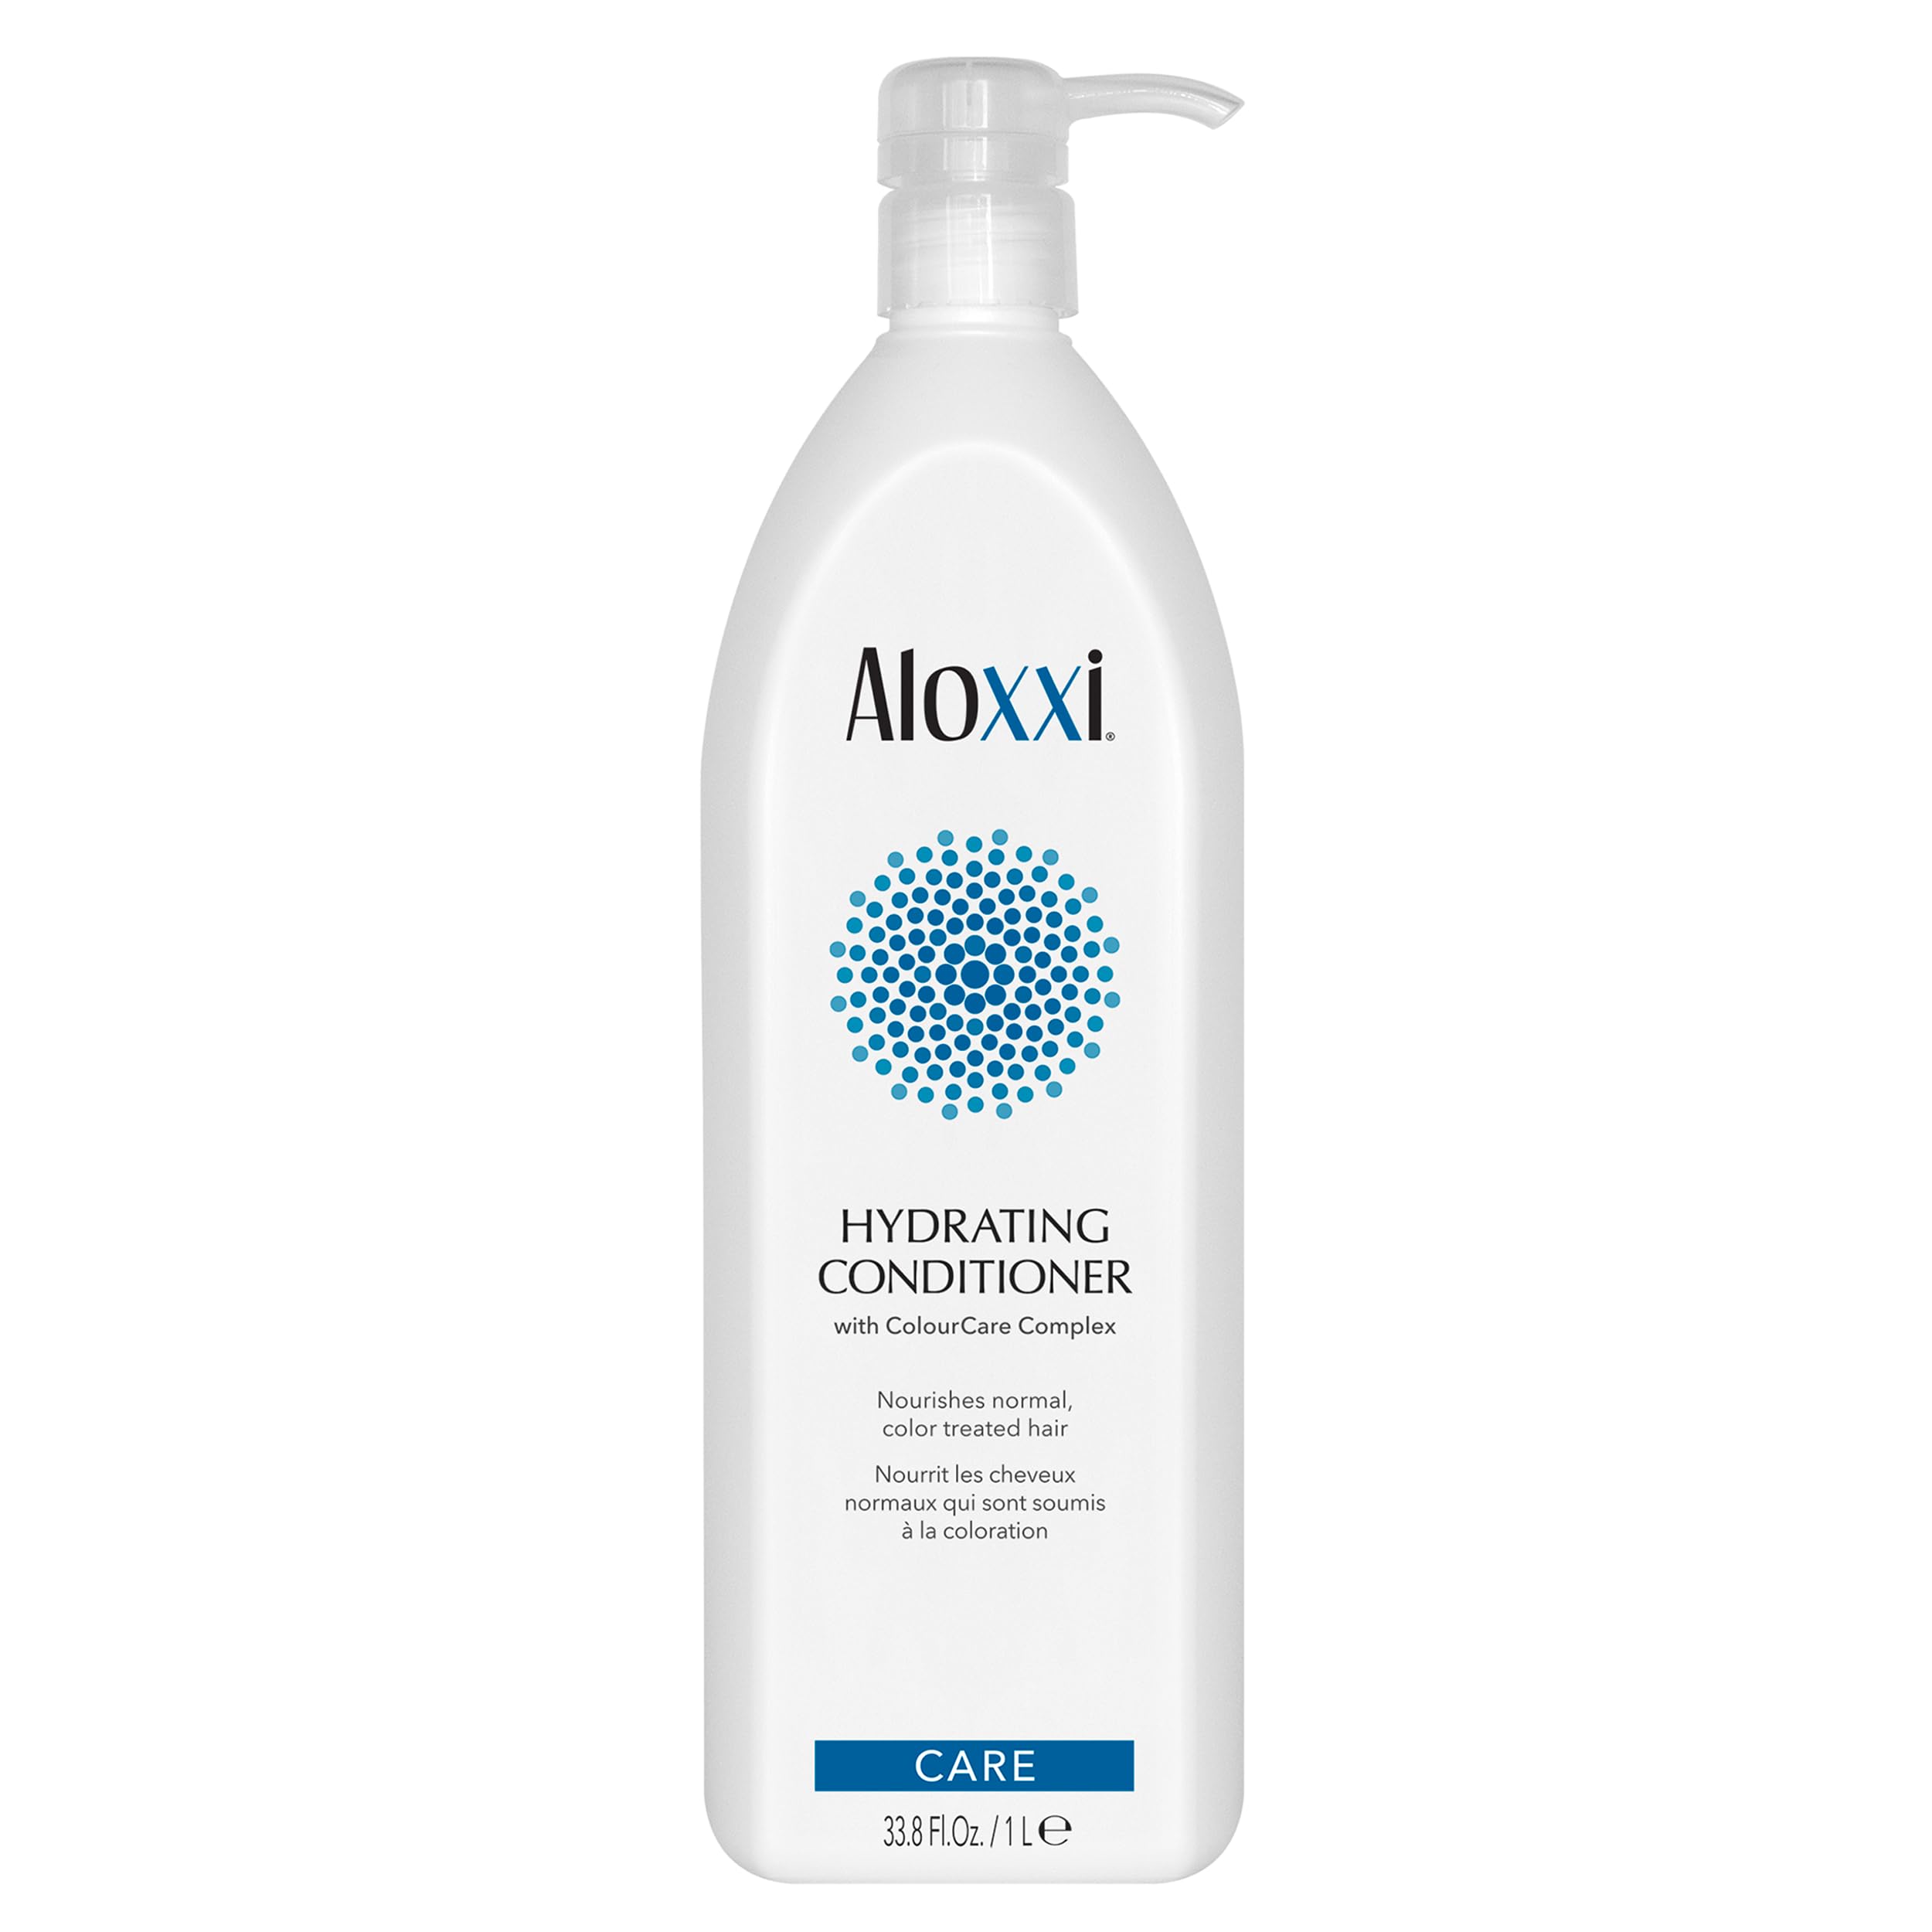 ALOXXI Hydrating Color Protectant Conditioner for Color Treated Hair with Keratin, Jojoba Oil & Olive Oil - Paraben & Sulfate Free